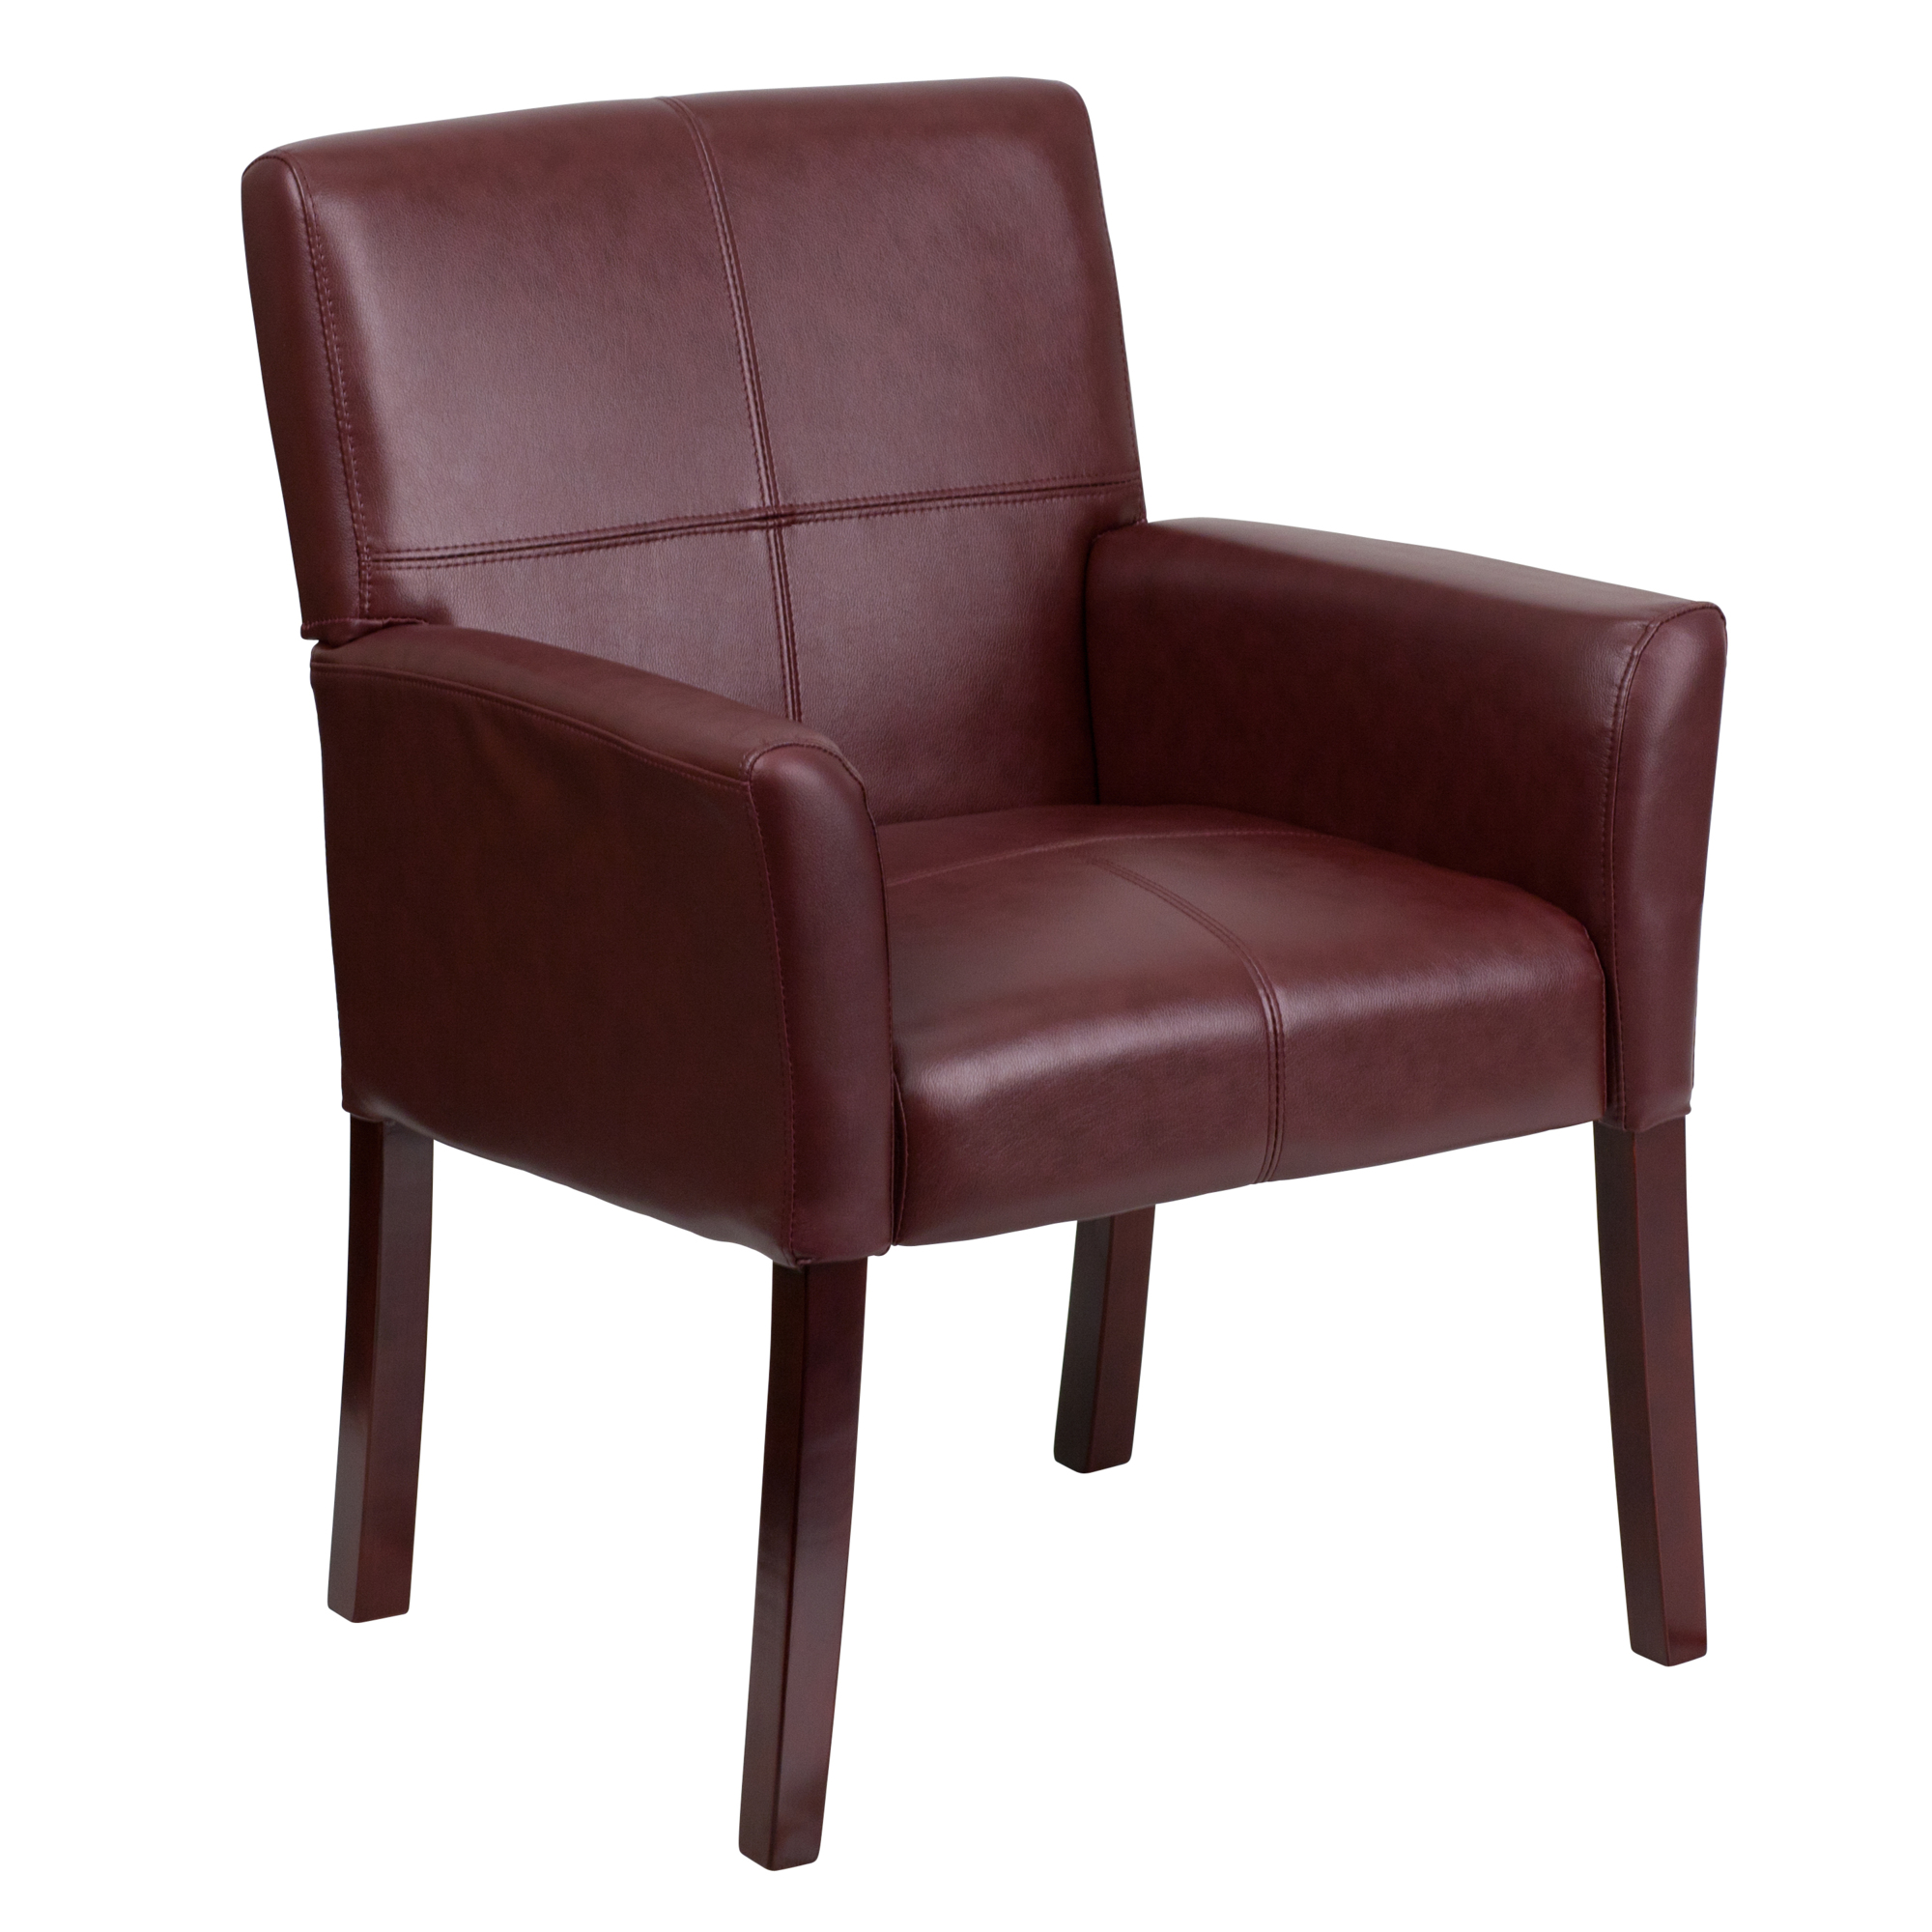 Flash Furniture, Burgundy LeatherSoft Side Chair with Mahogany Legs, Primary Color Burgundy, Included (qty.) 1, Model BT353BGLEA